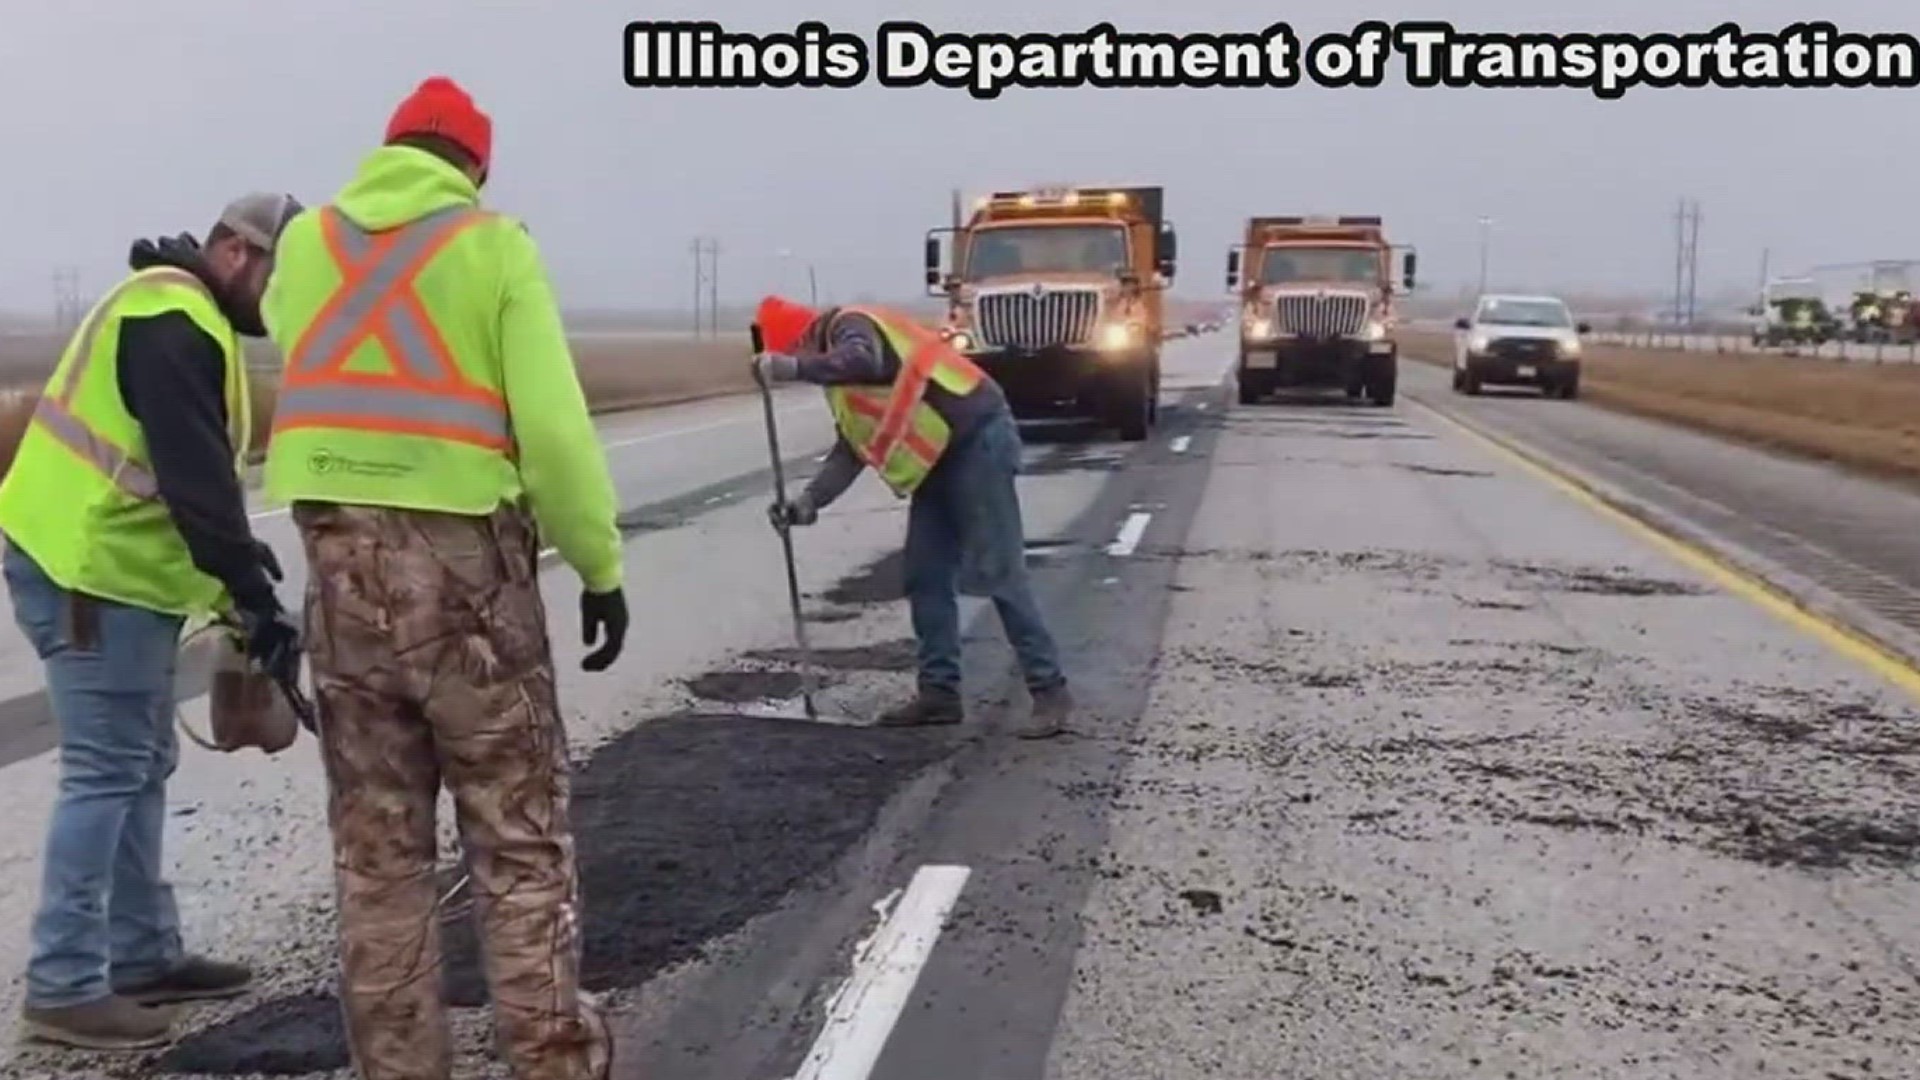 The move comes after months of negotiations between the union and IDOT, which represents about 3,800 workers.